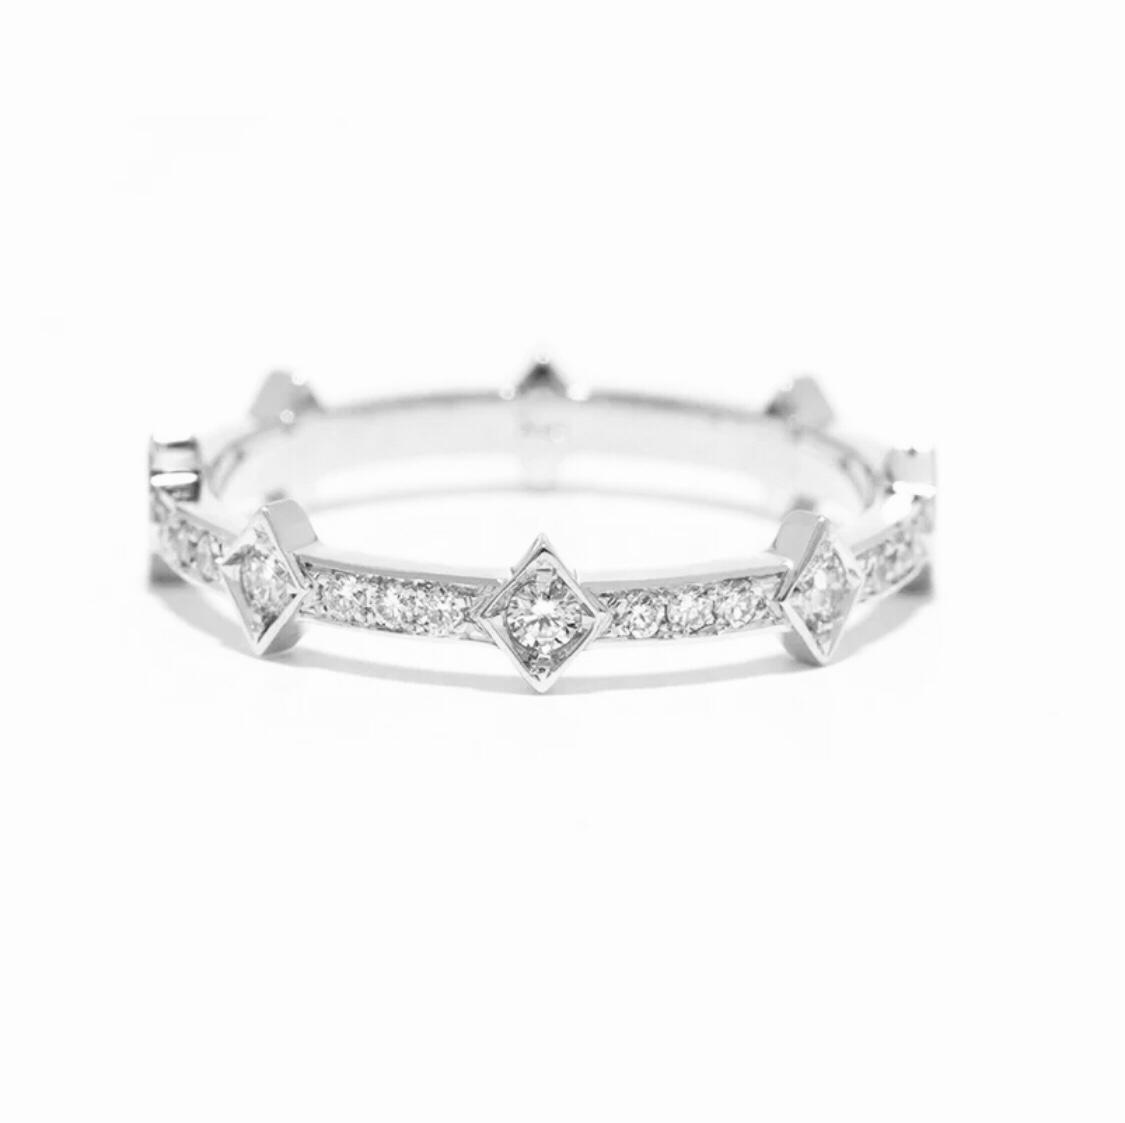 Crown Eternity With Side Stones Ring/18k White Gold & Premium Cubic Zirconia - infinityXinfinity.co.uk